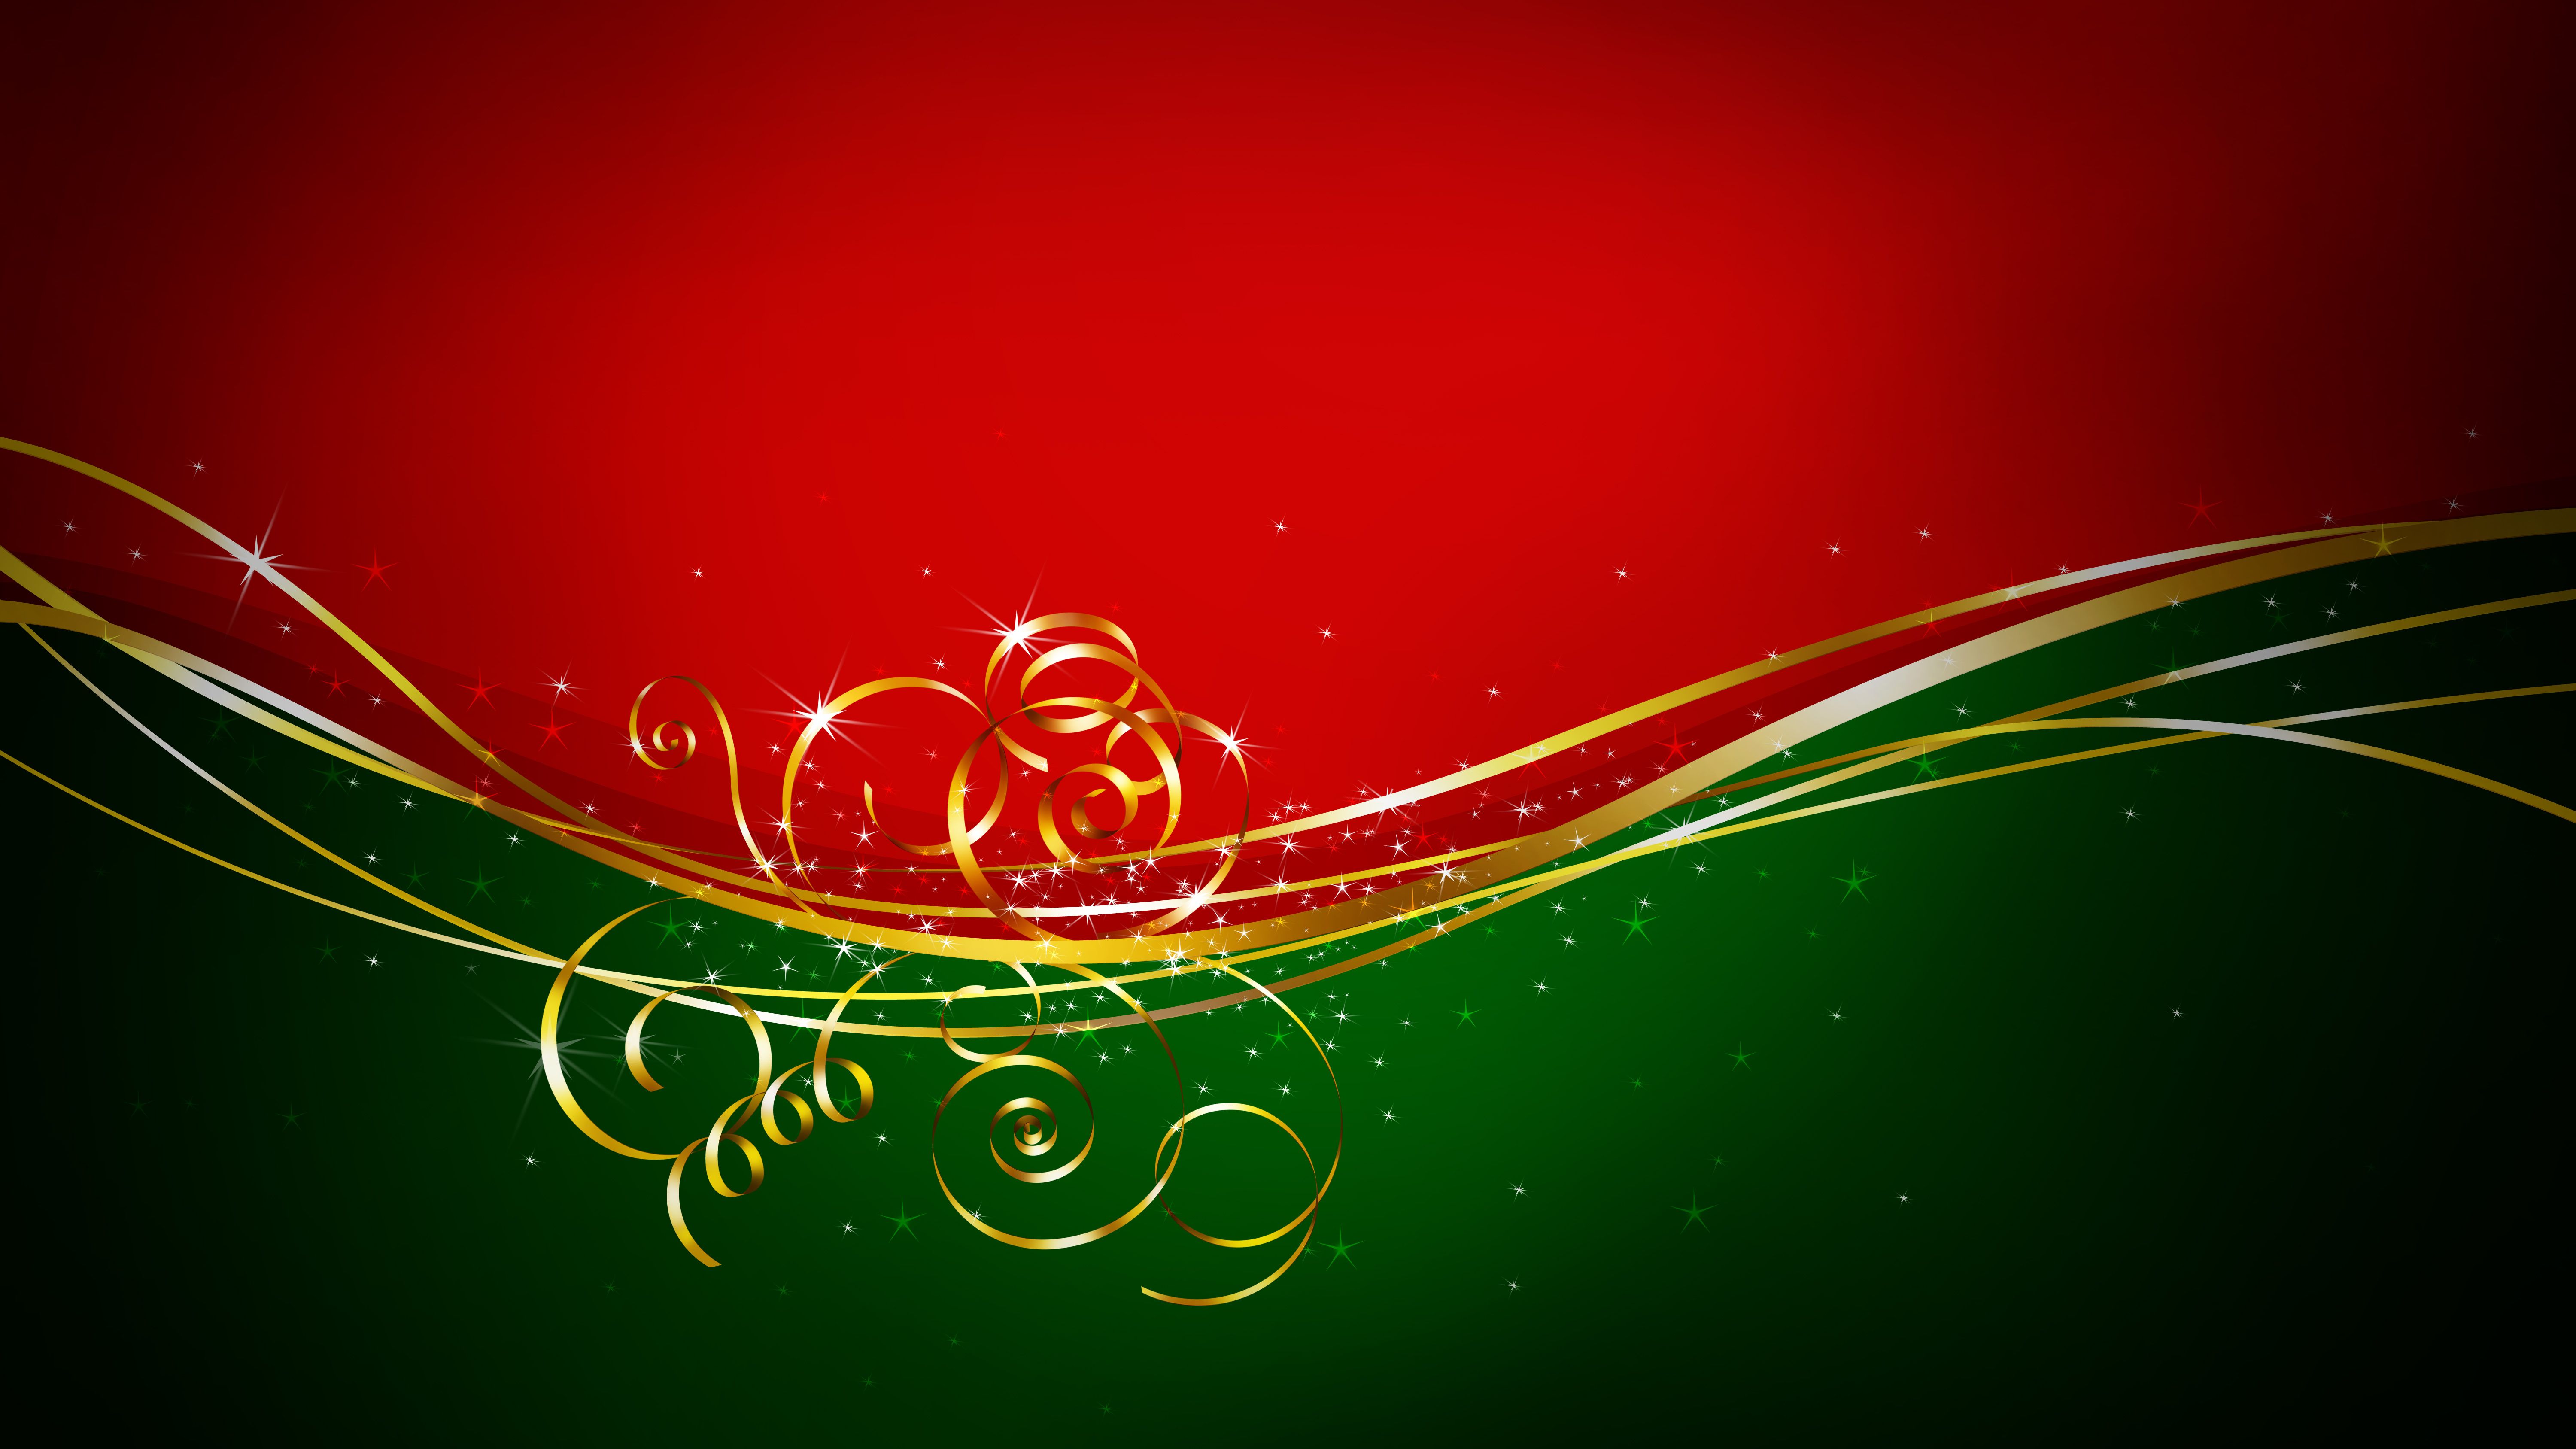 Free download 6000x3375px Red and Green Wallpaper [6000x3375] for your Desktop, Mobile & Tablet. Explore Christmas Red And Green Wallpaper. Christmas Red And Green Wallpaper, Red and Green Wallpaper